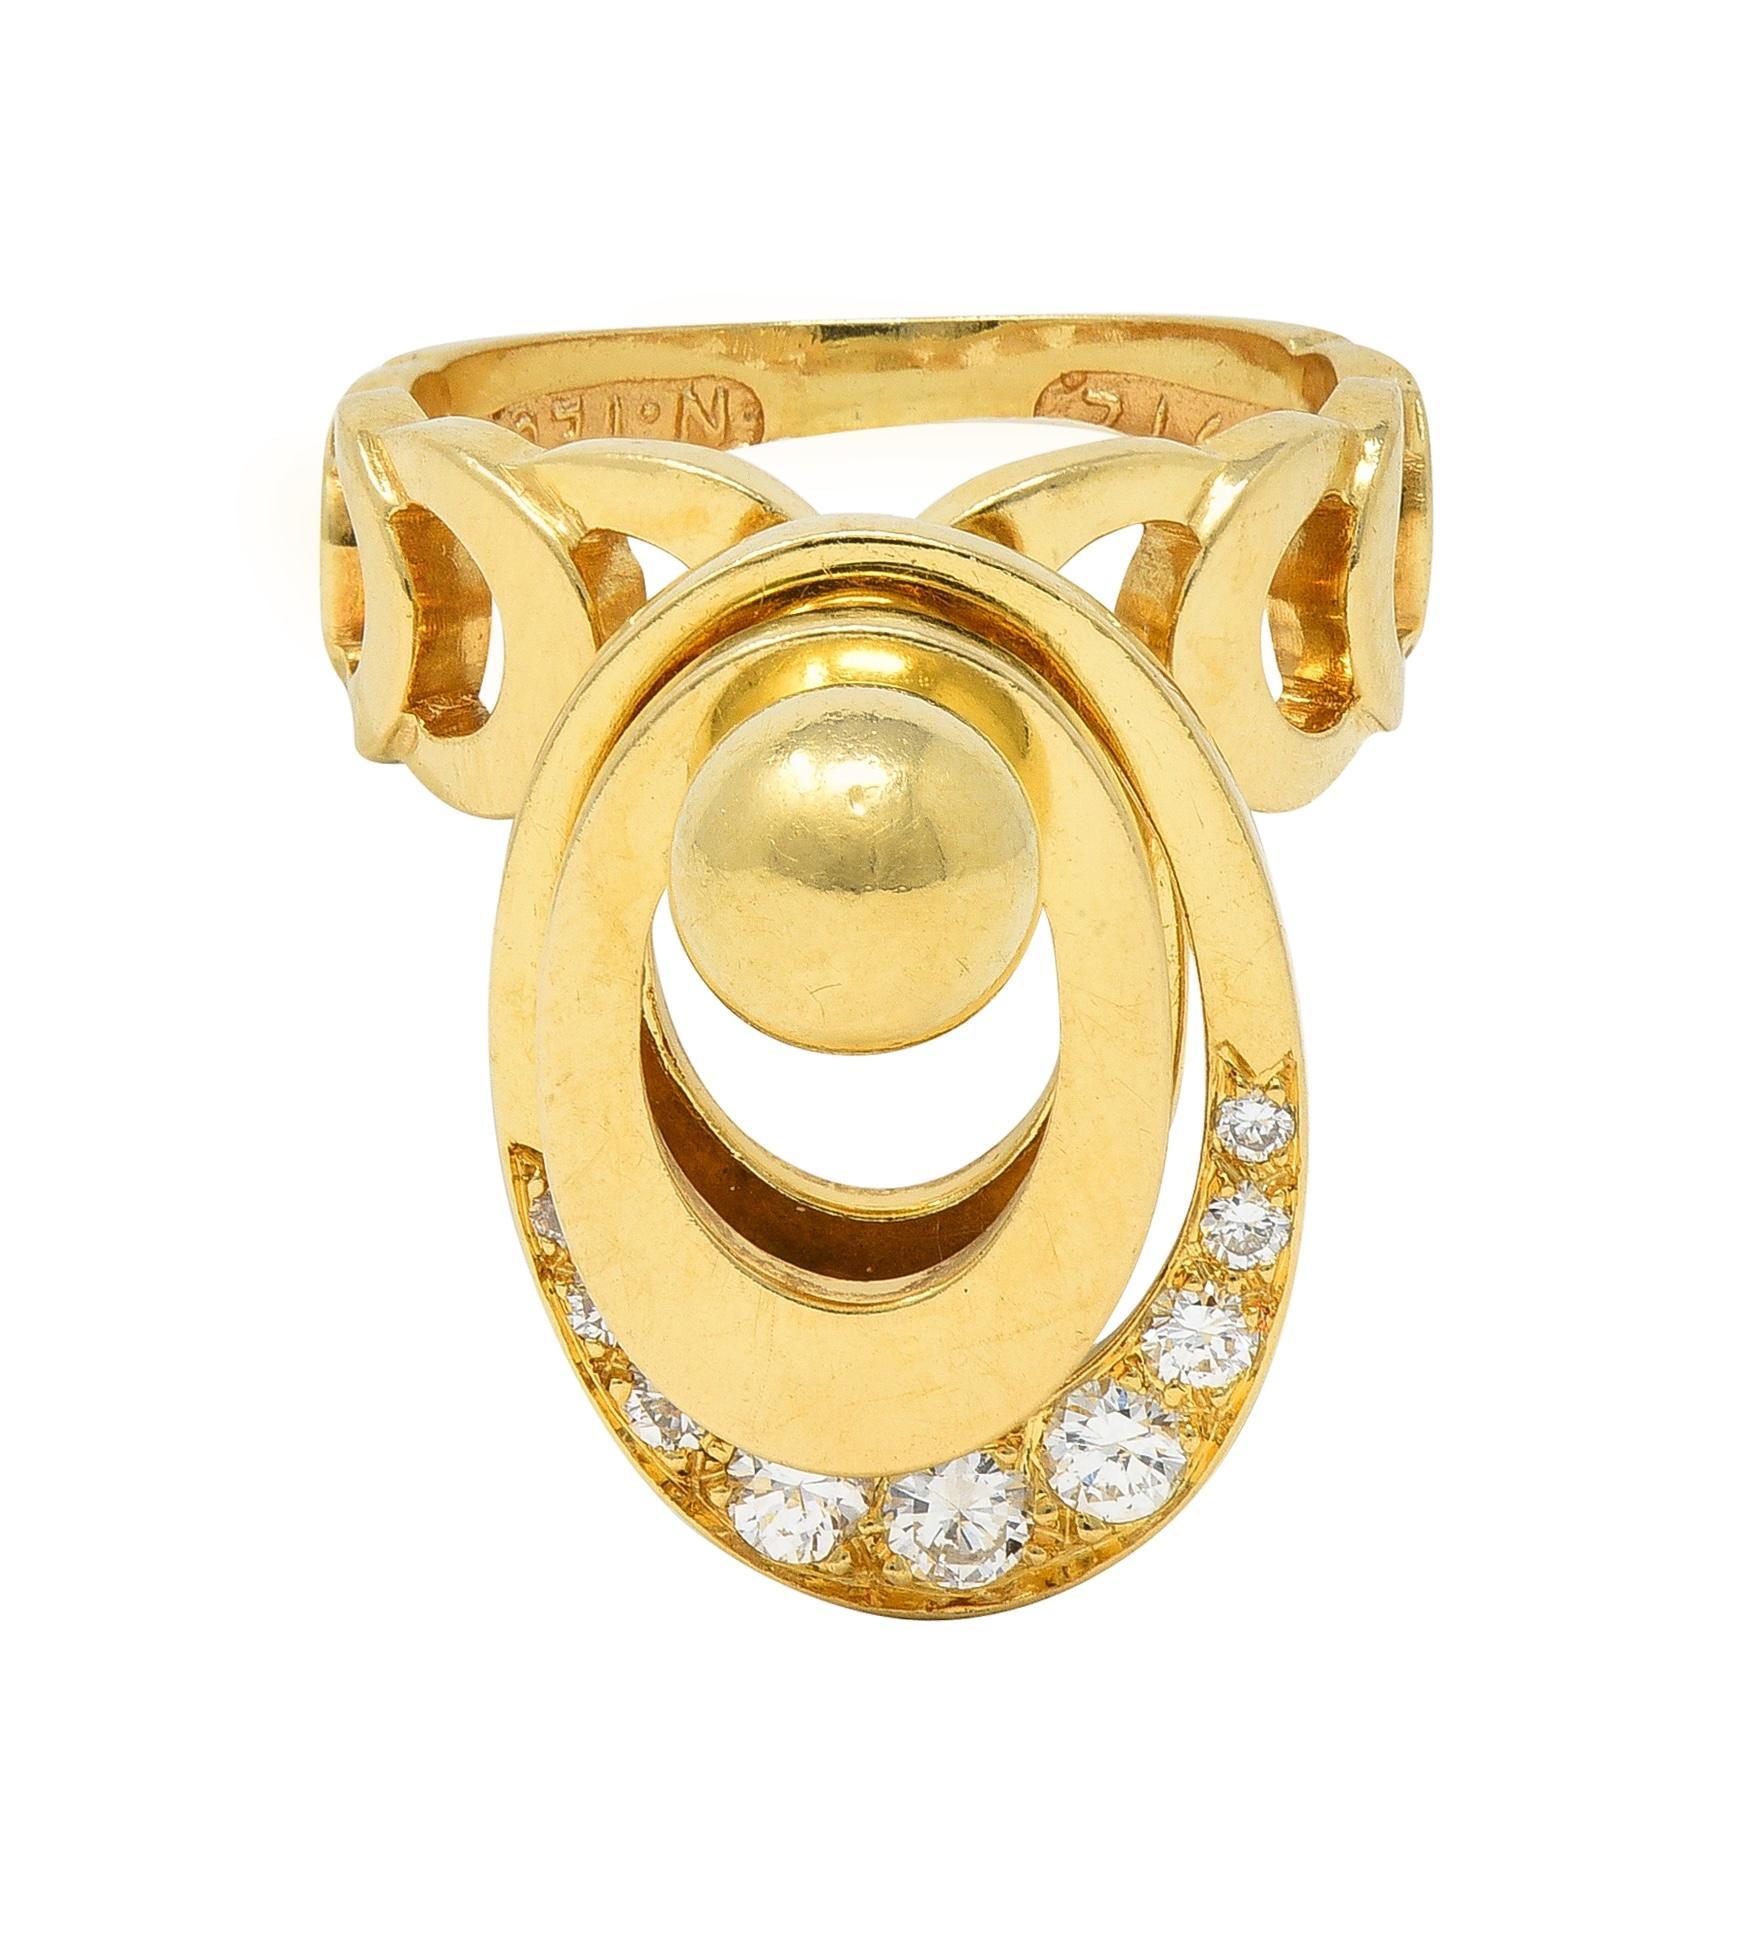 Featuring three oval-shaped rings pierced and stacked on a post - spinning with kinetic movement
Featuring round brilliant cut diamonds bead set on middle oval 
Weighing approximately 0.32 carat total - G color with VS clarity
Completed by pierced